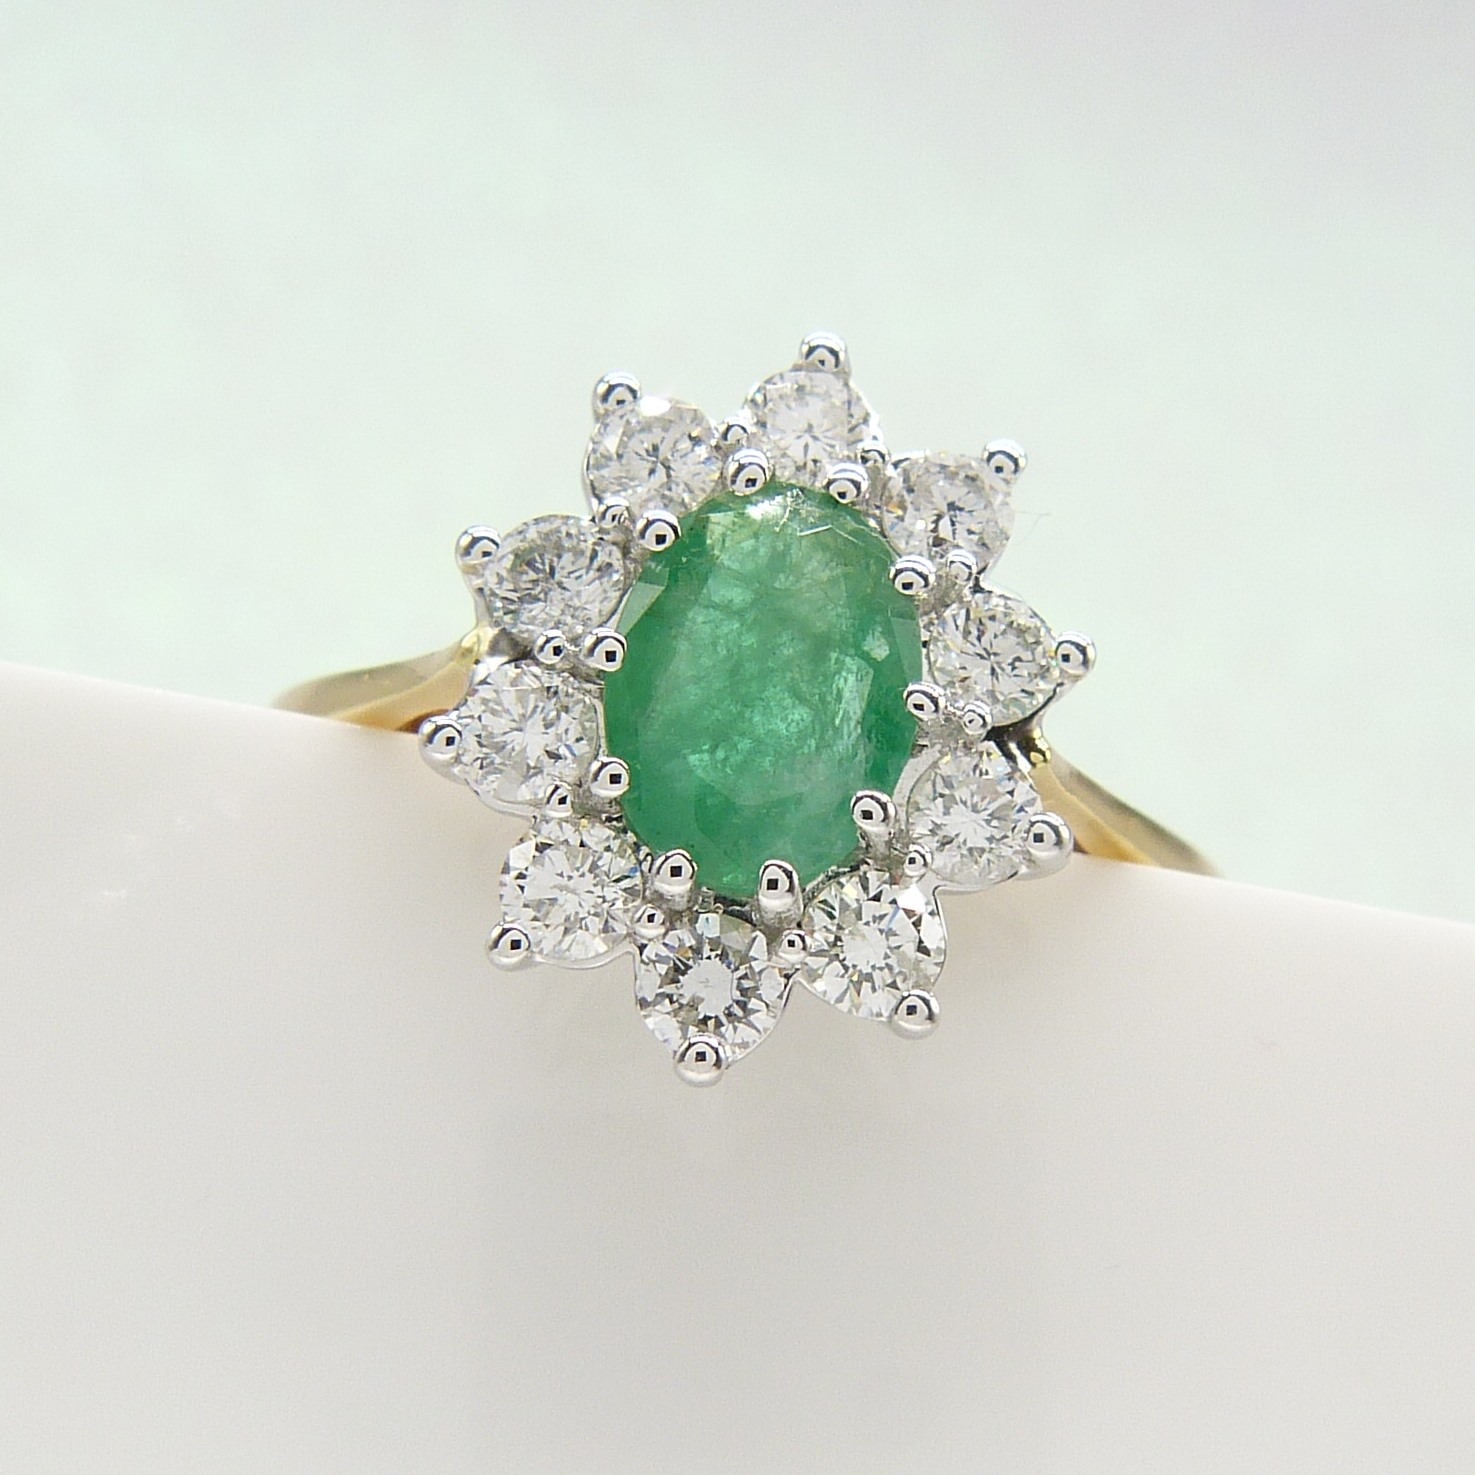 A certificated 18ct yellow Gold oval Emerald gemstone and round brilliant-cut Diamond ring - Image 2 of 10